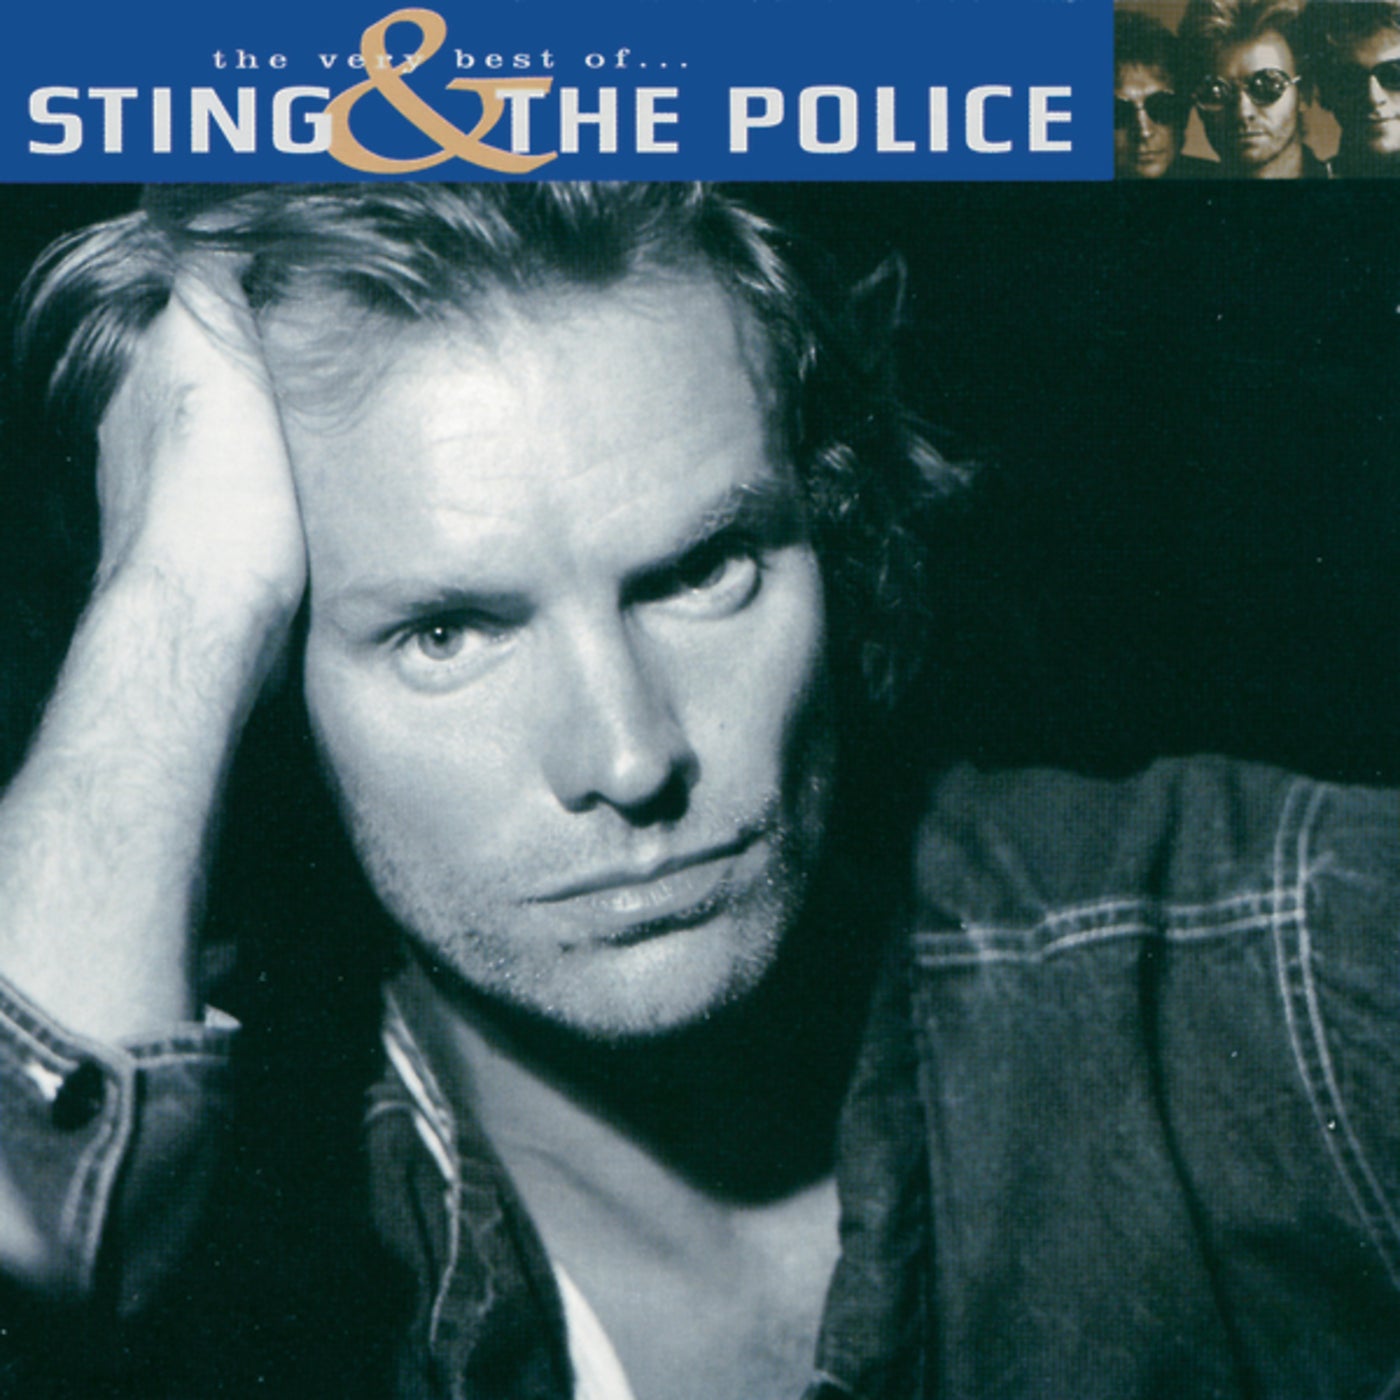 The Very Best Of Sting And The Police by The Police, Sting and Cheb ...